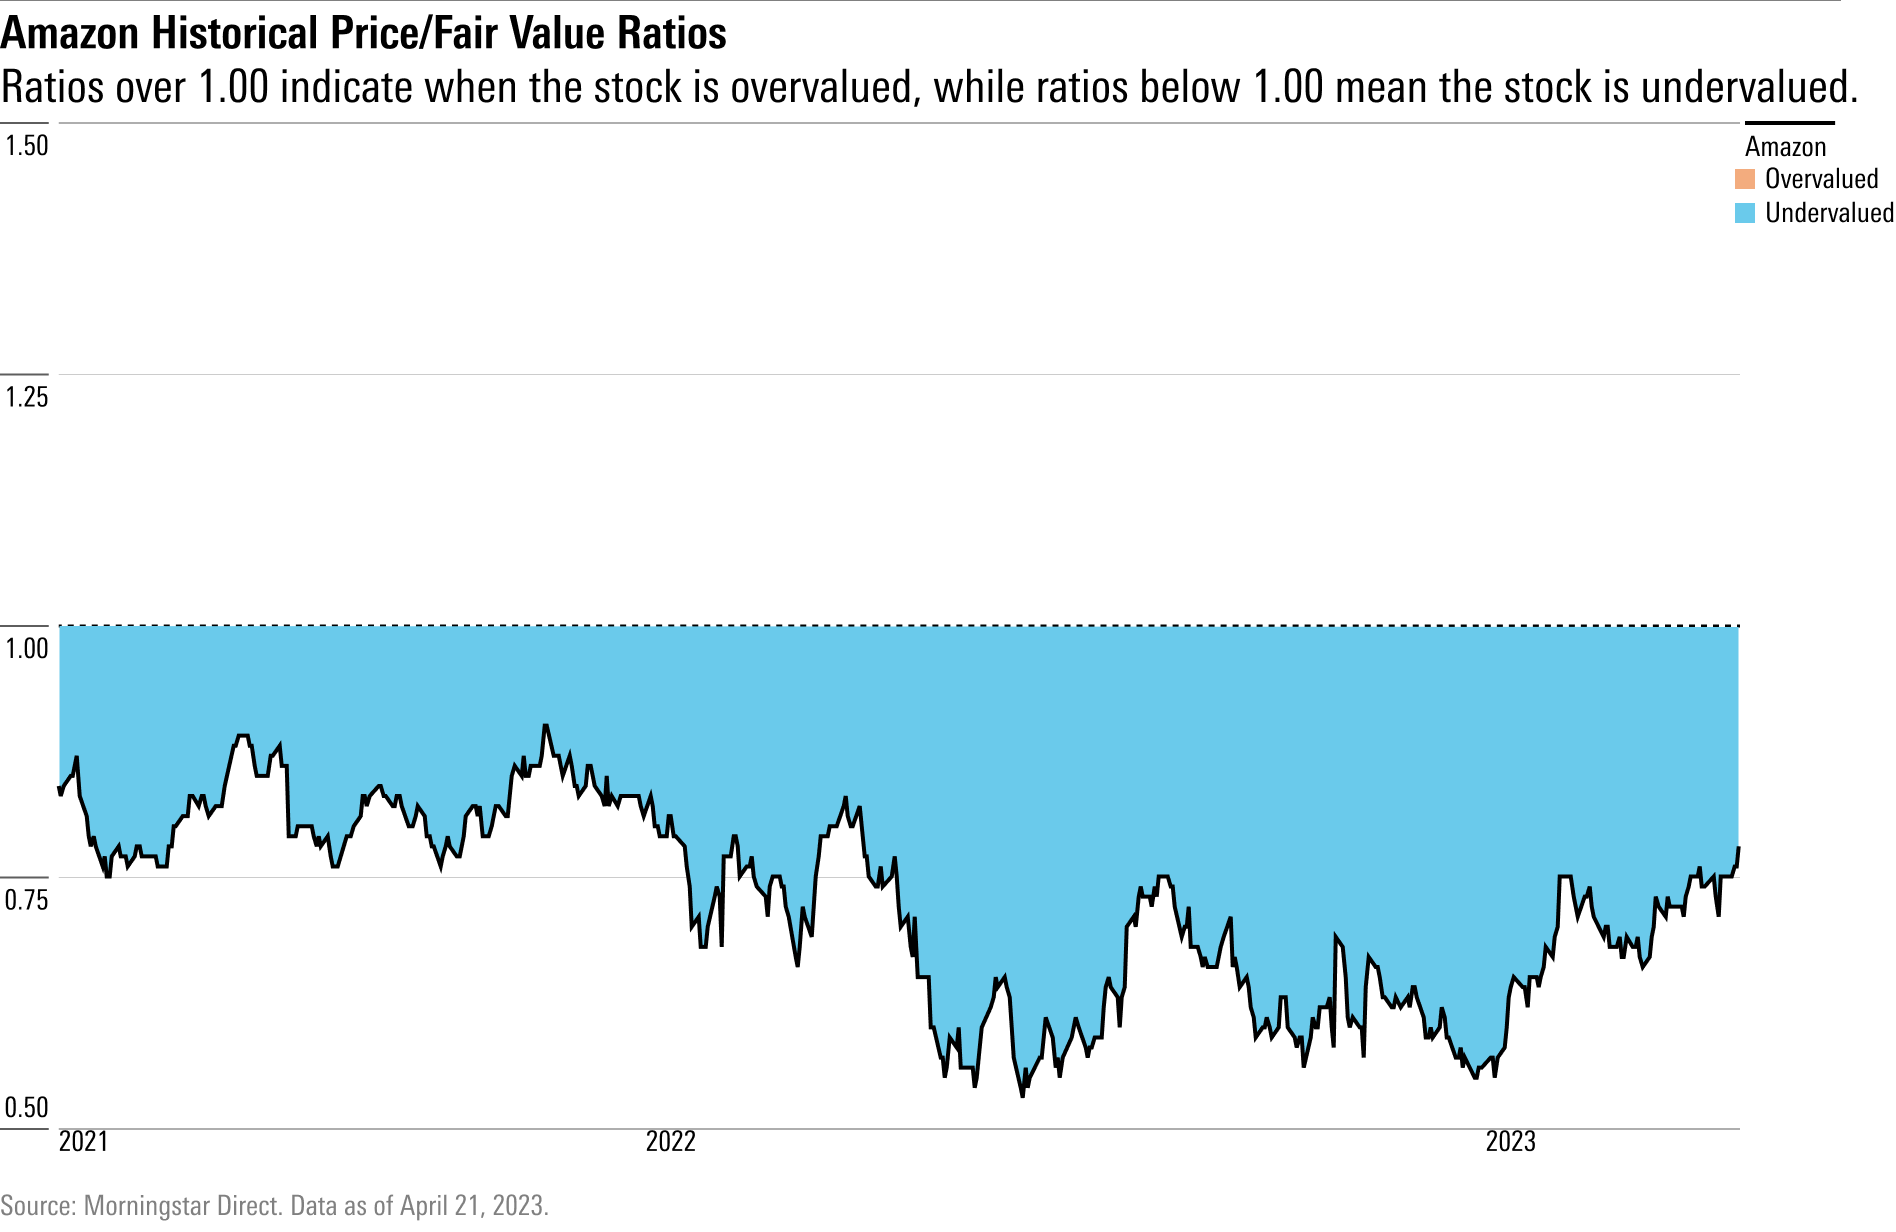 Ratios over 1.00 indicate when the stock is overvalued, while ratios below 1.00 mean the stock is undervalued.